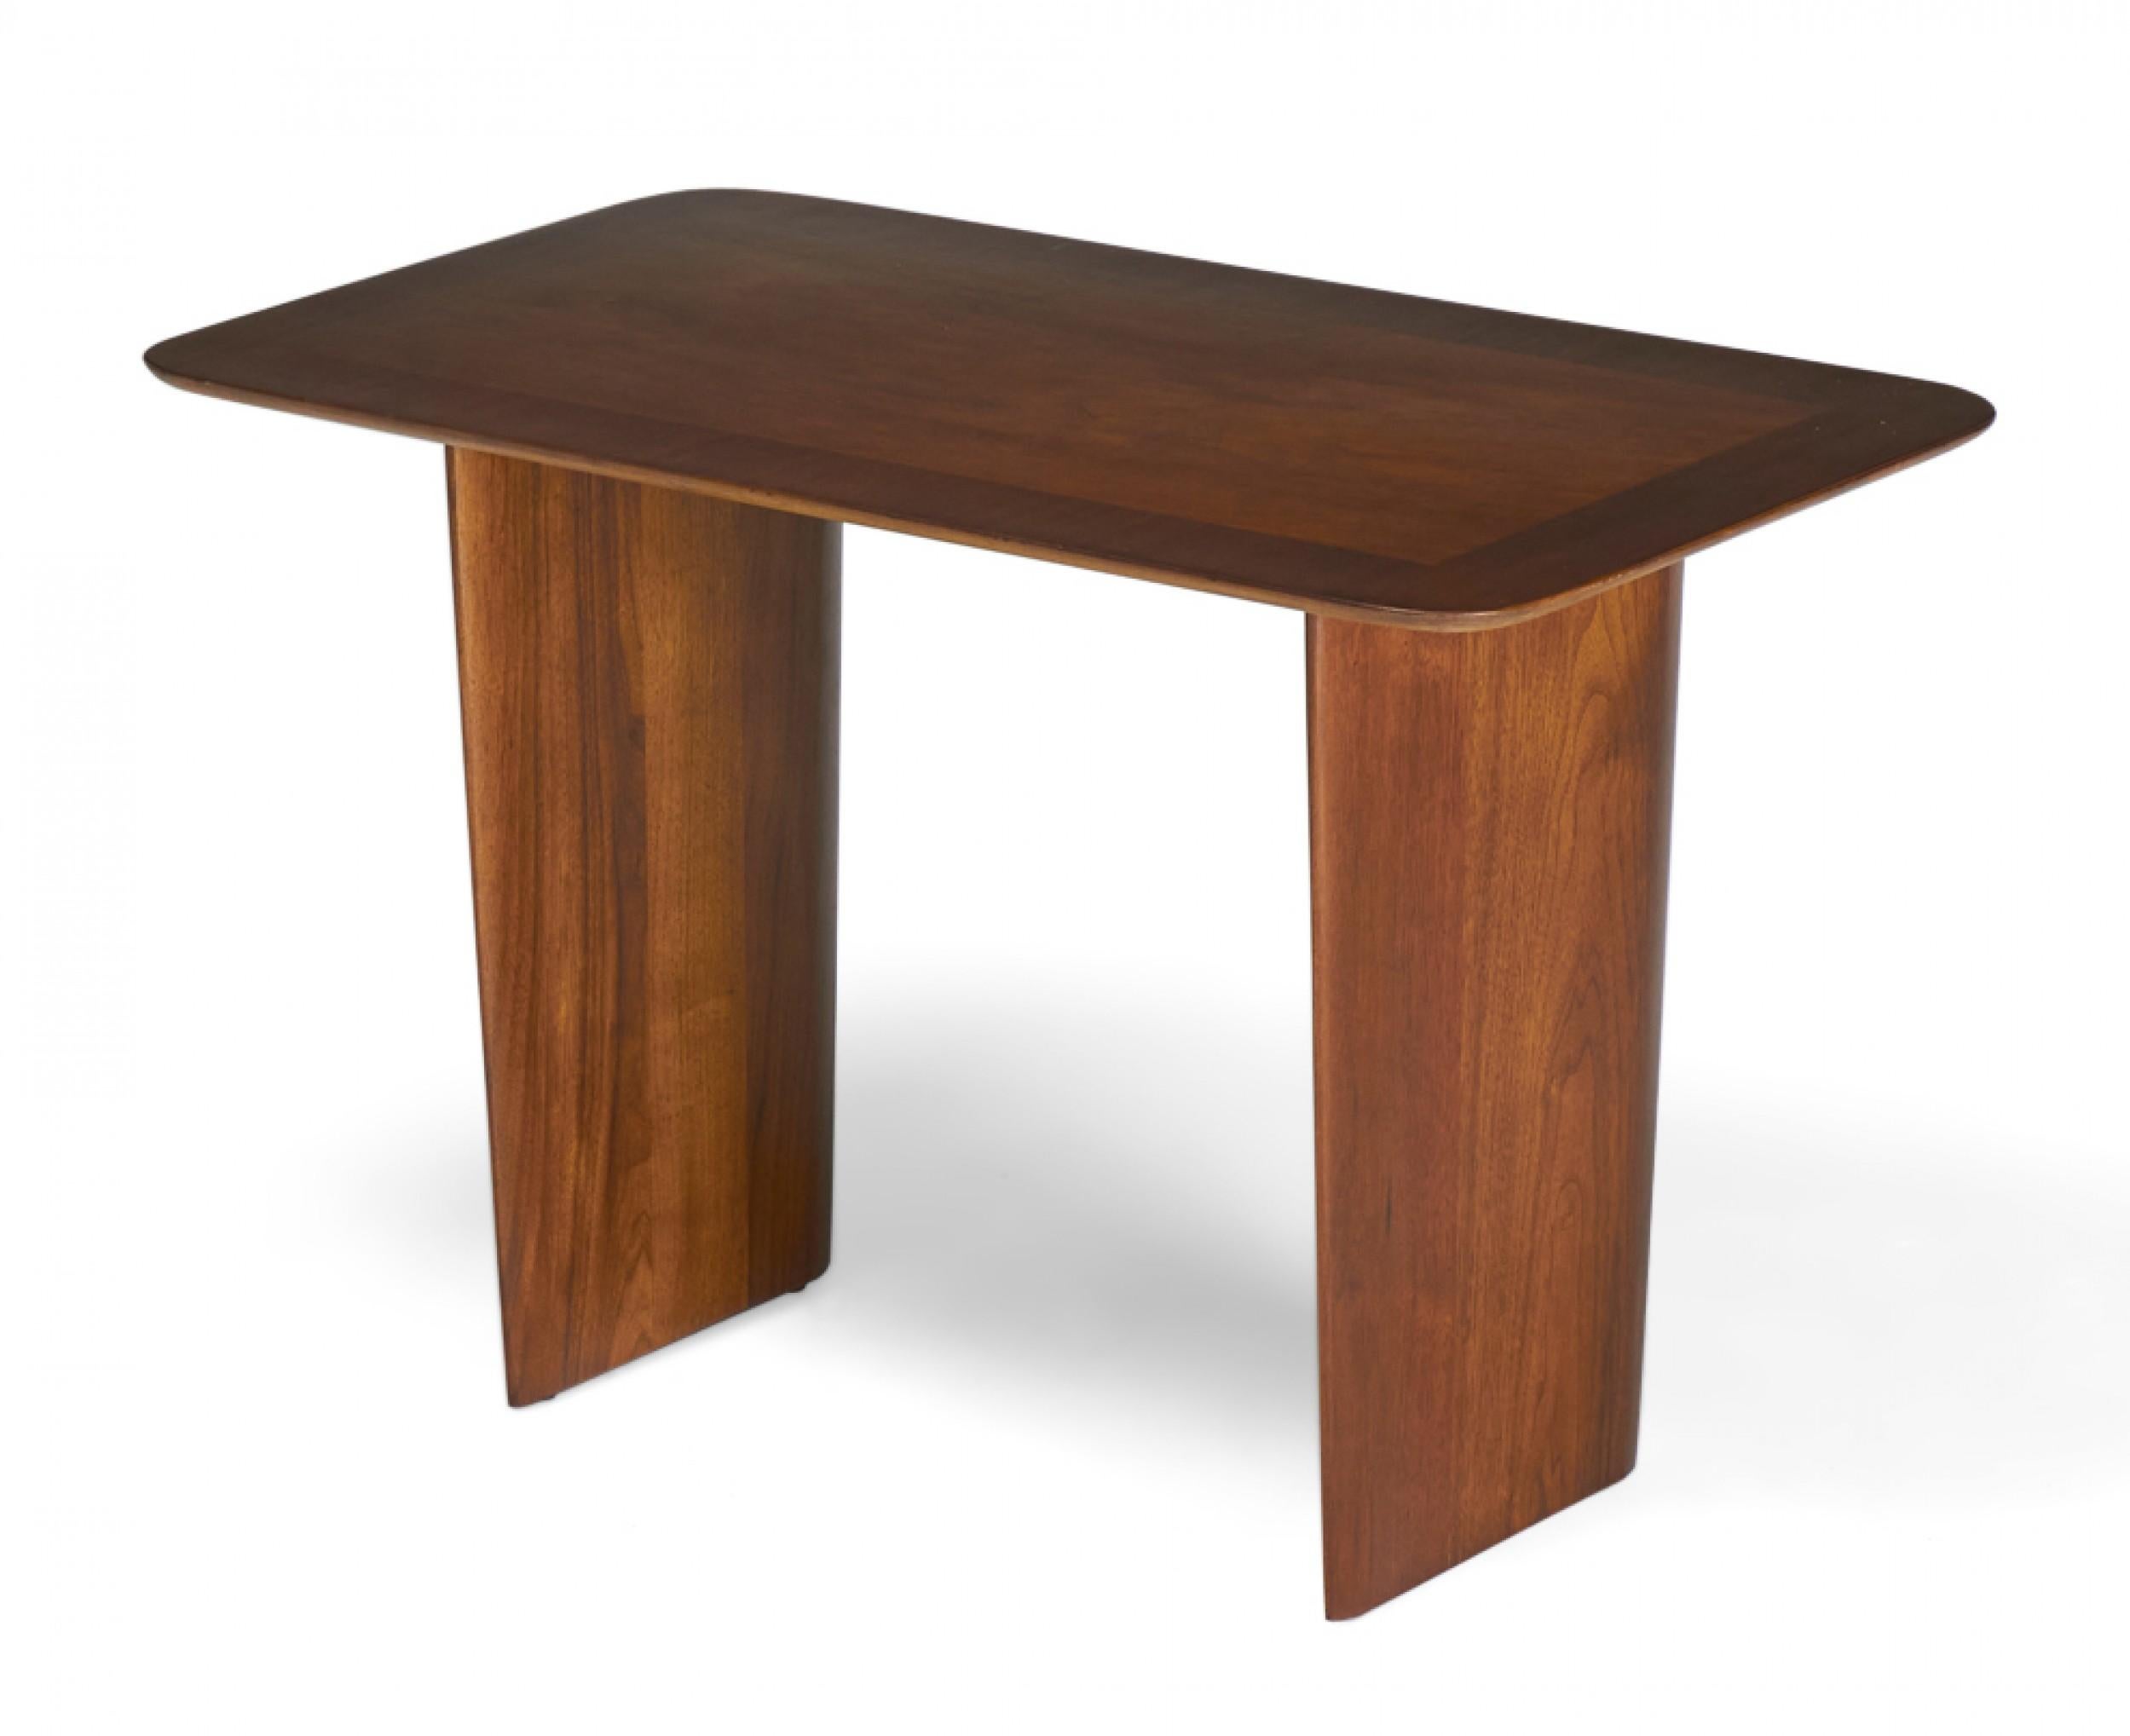 American Mid-Century (circa 1955) walnut occasional / end tables with rectangular tops with rounded corners supported by two wide solid wood legs. (T.H. ROBSJOHN-GIBBINGS FOR WIDDICOMB FURNITURE)(PRICED AS PAIR)
